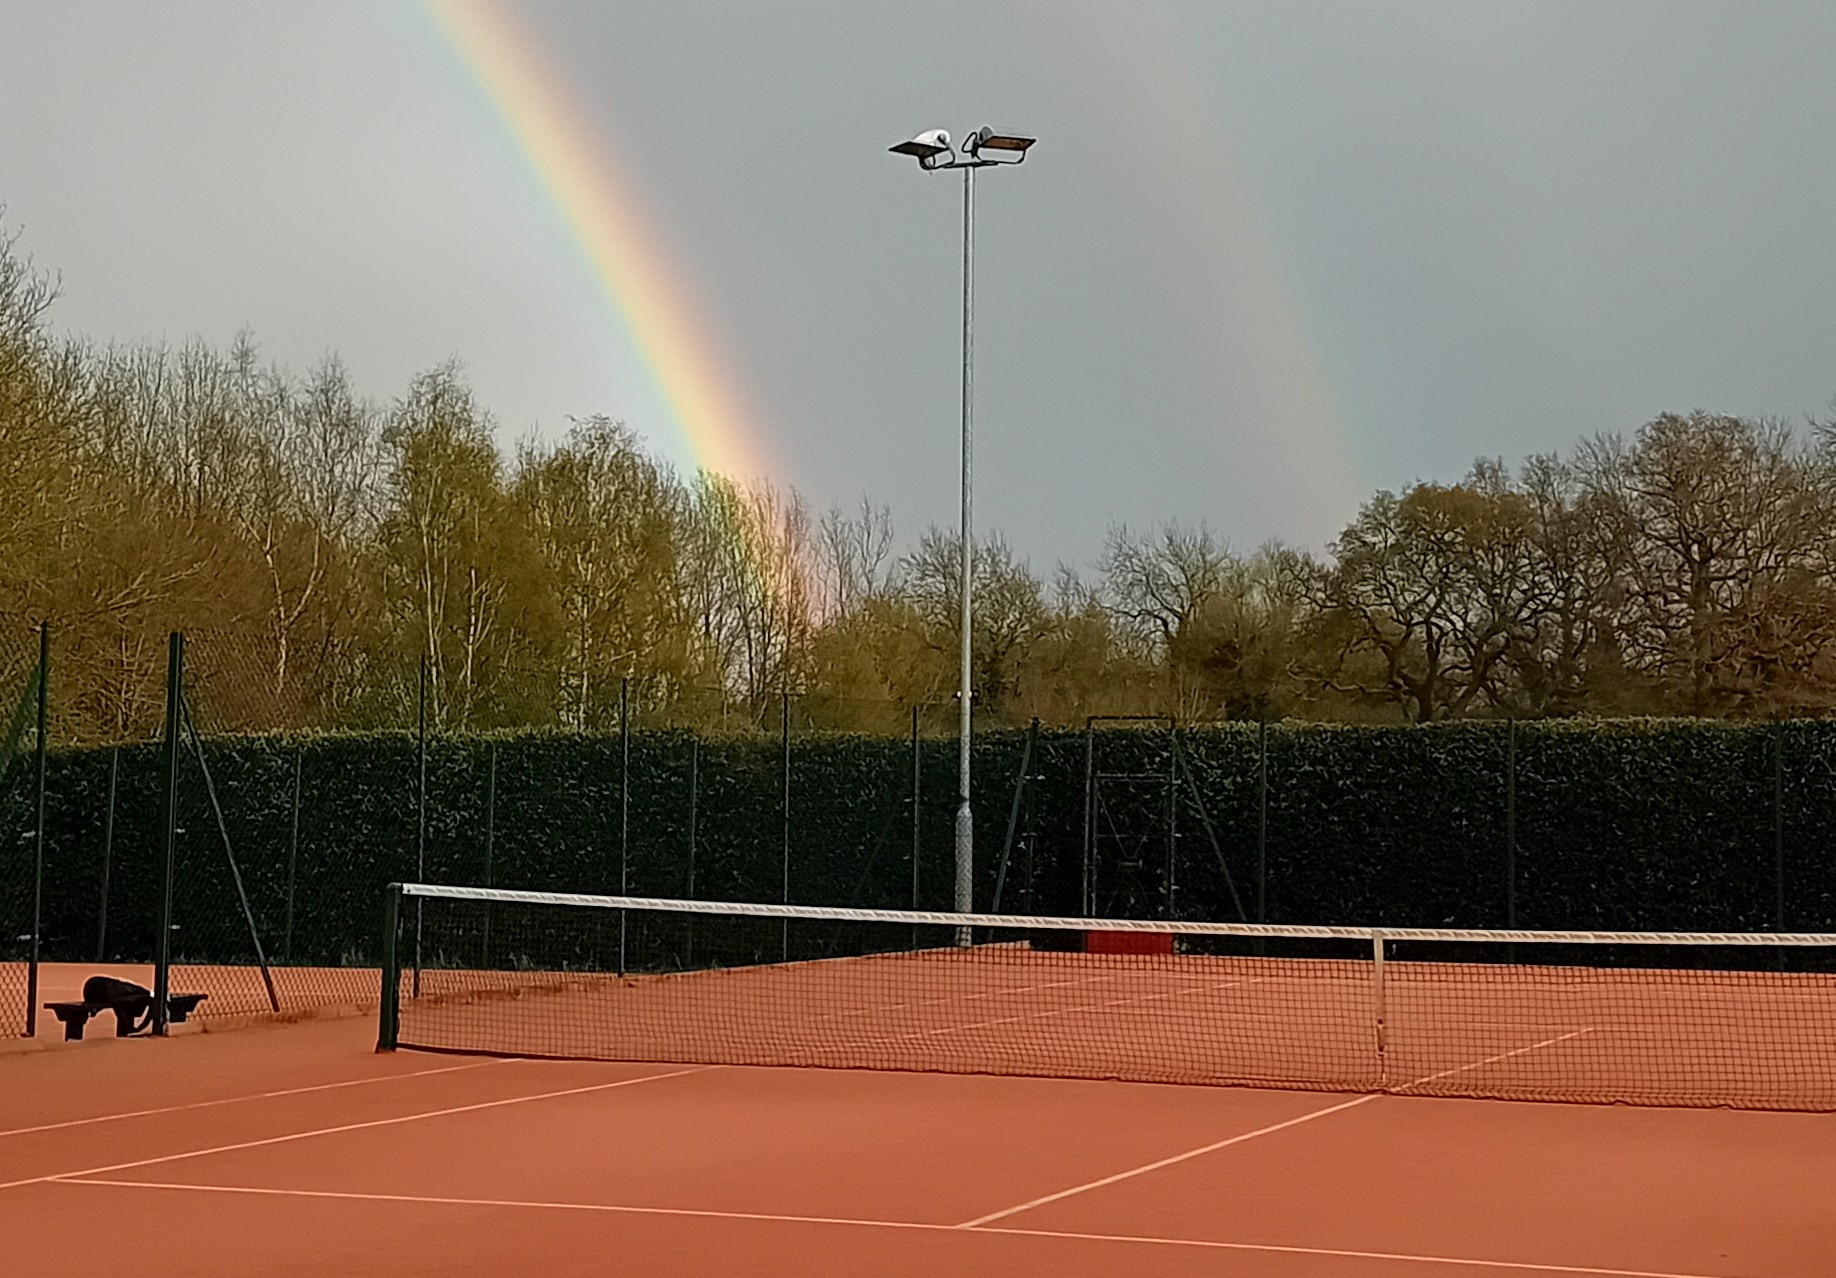 A picture of clay tennis courts, with a rainbow visible in the background